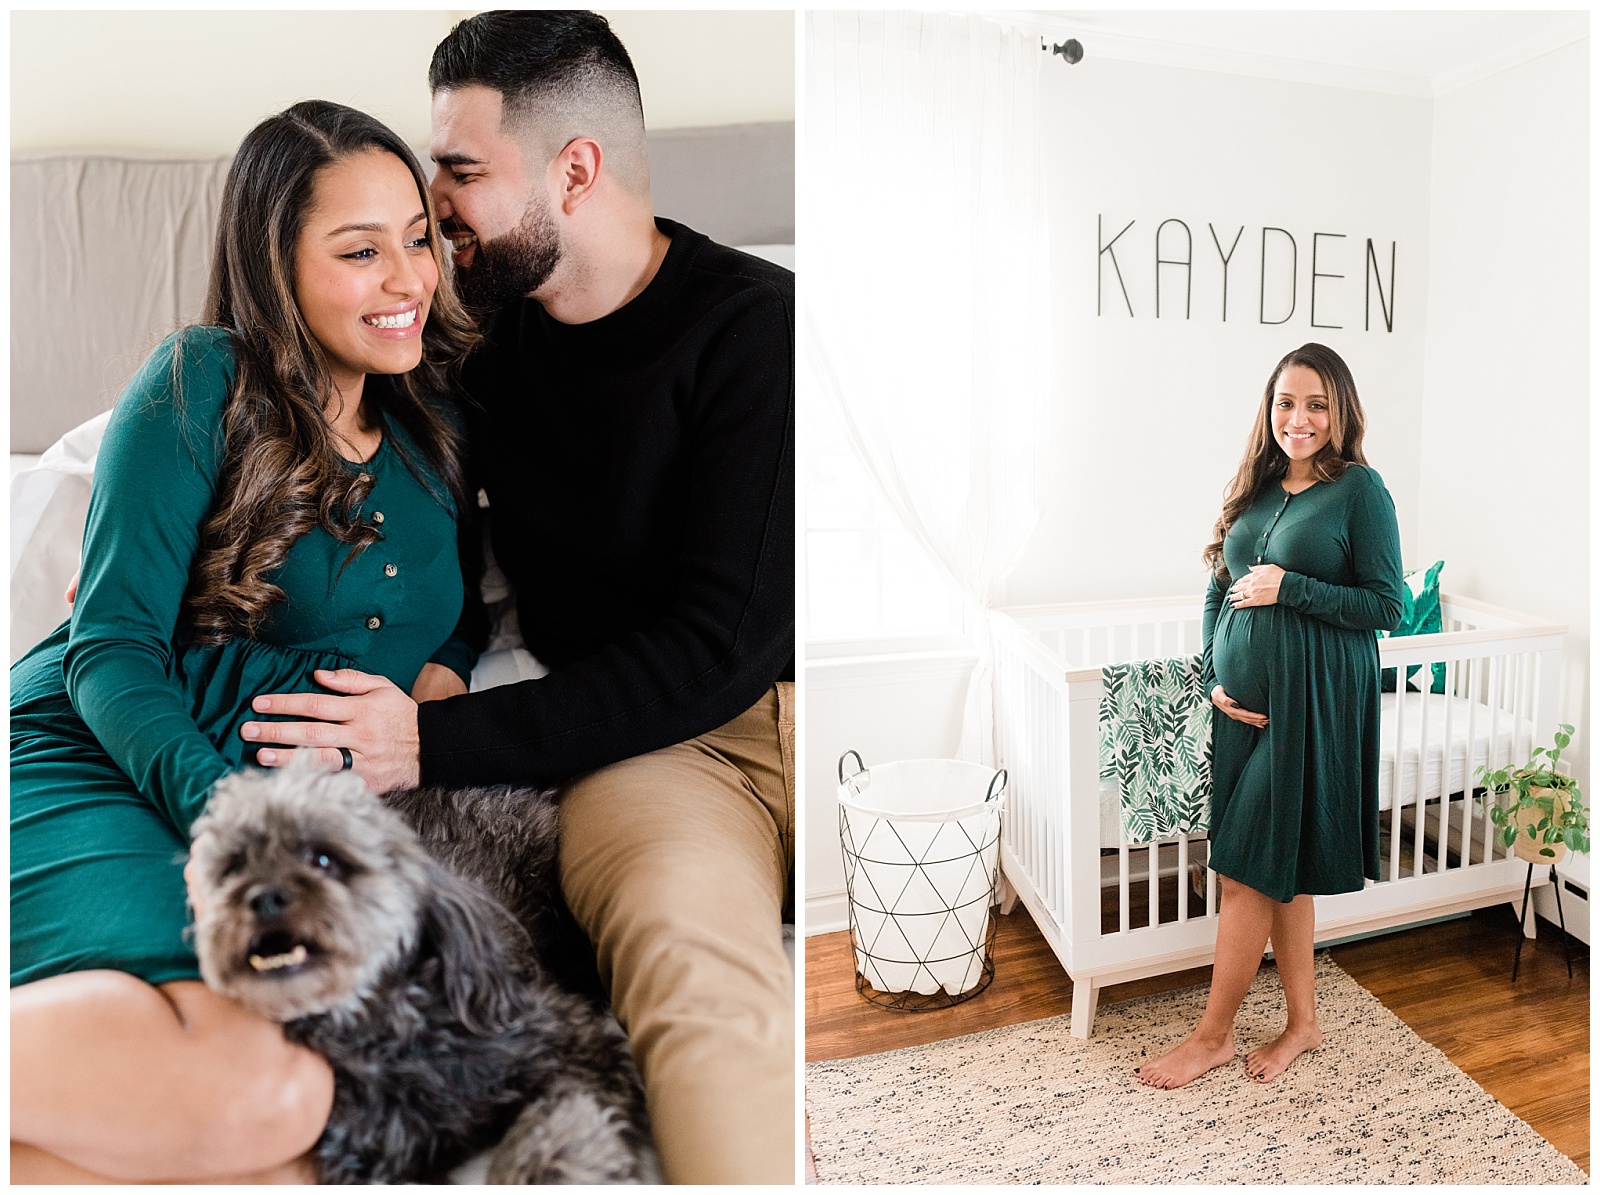 In Home Maternity Session, Nursery, Baby, New Parents, Maternity Shoot, Pregnant, Pregnancy Photos, New Jersey, Photographer, Baby Boy, Jungle Nursery, Photo, baby names, Kayden, Dog,